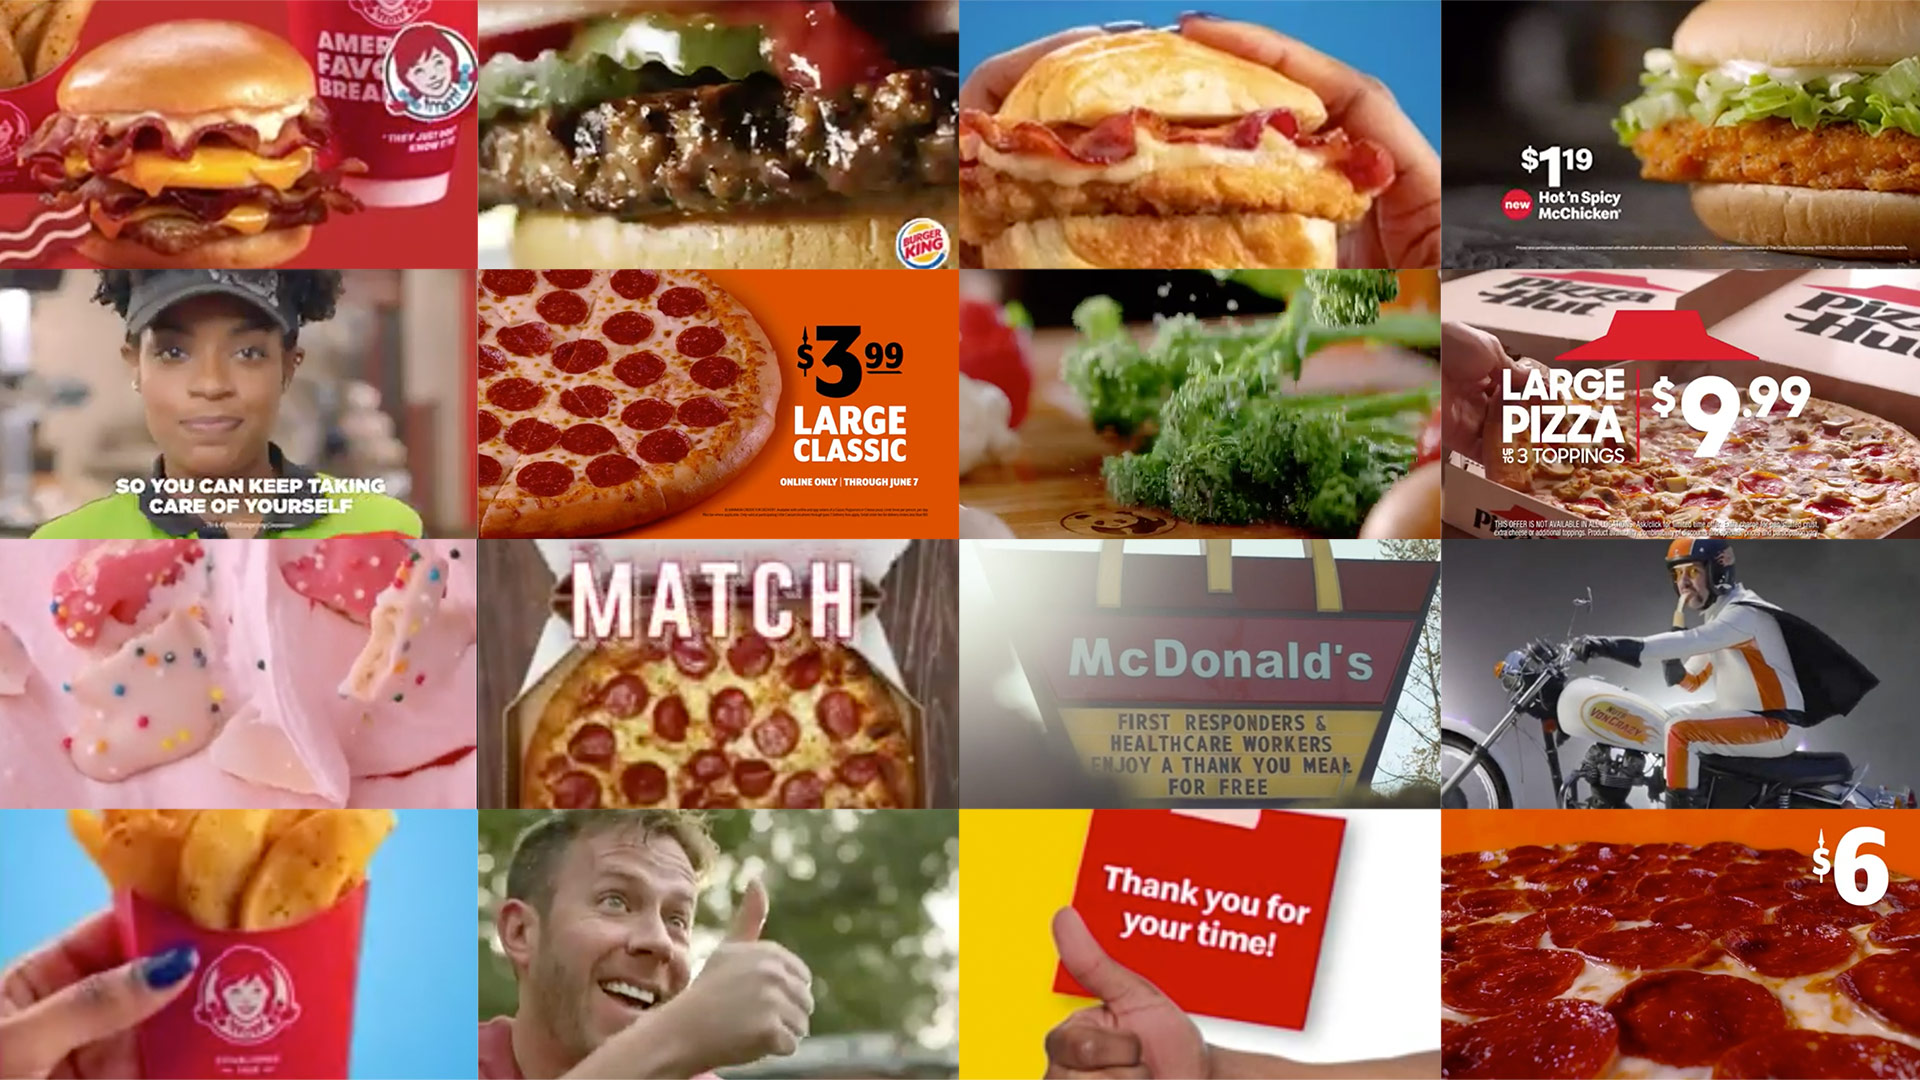 Selected thumbnails from some of the ads tested